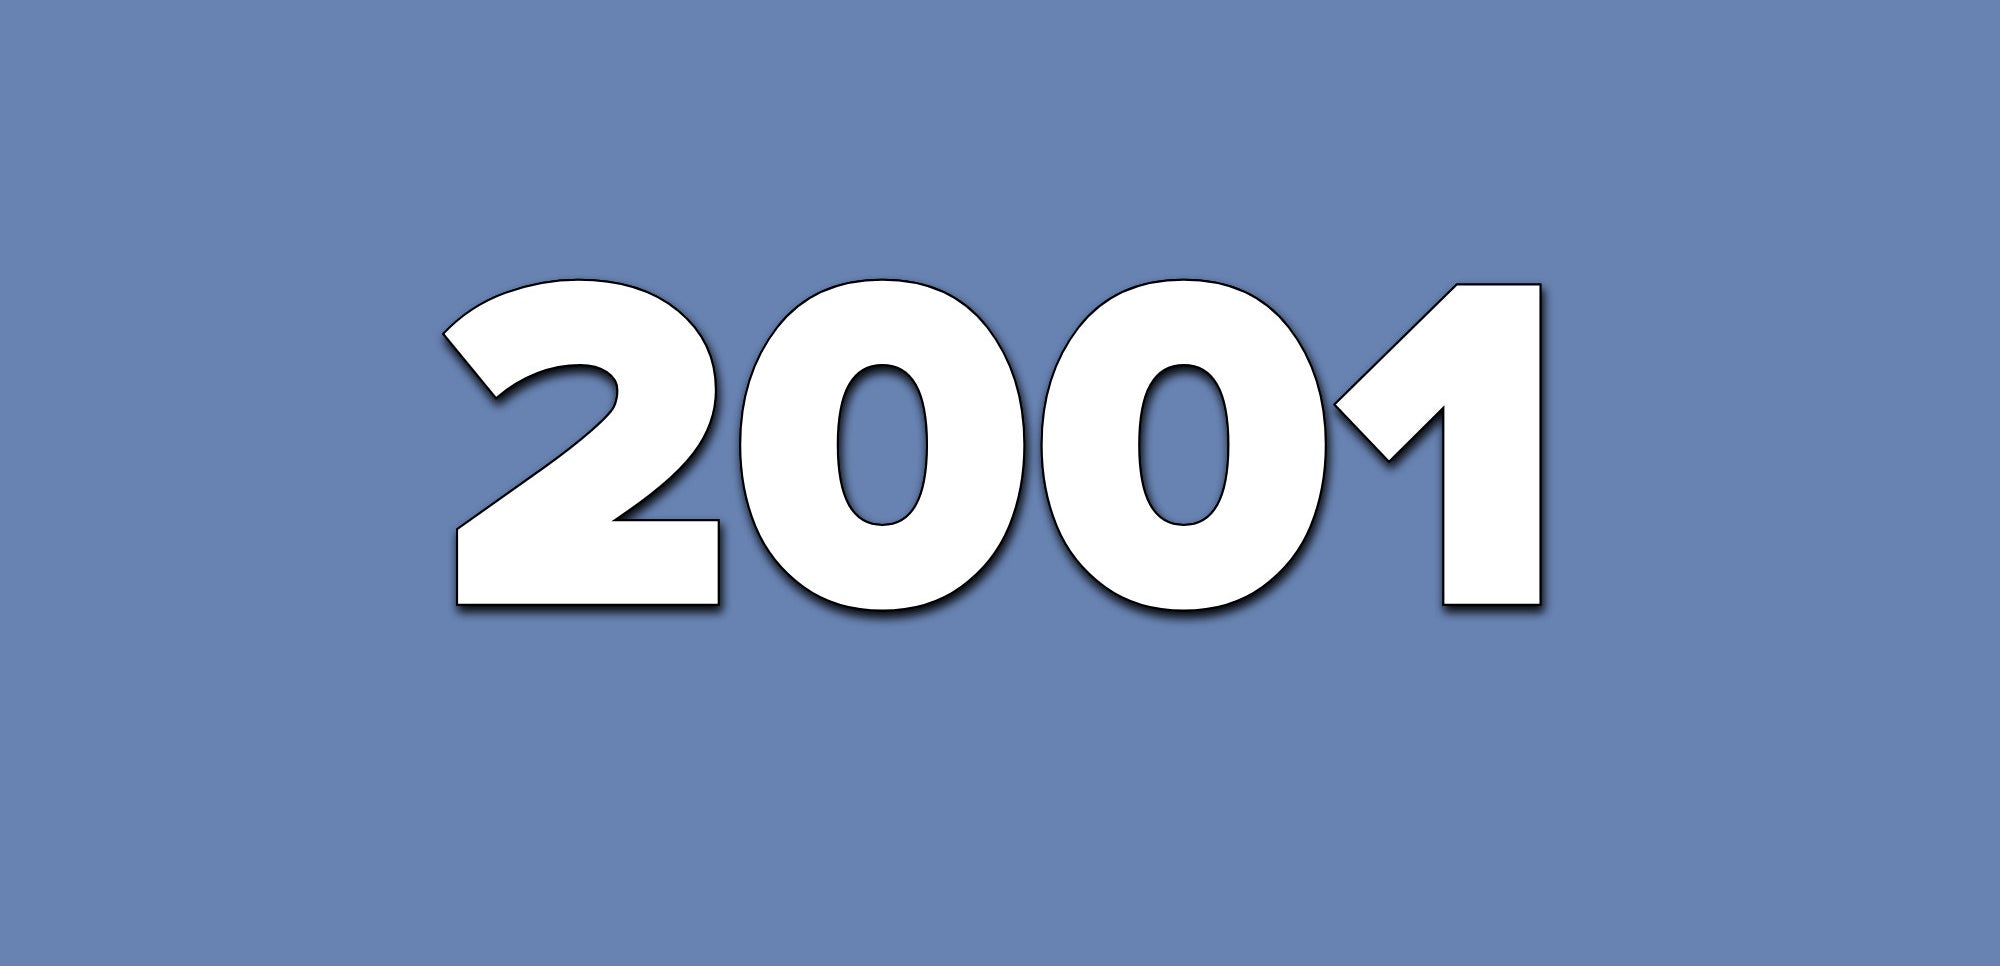 A blue background with text that says 2001